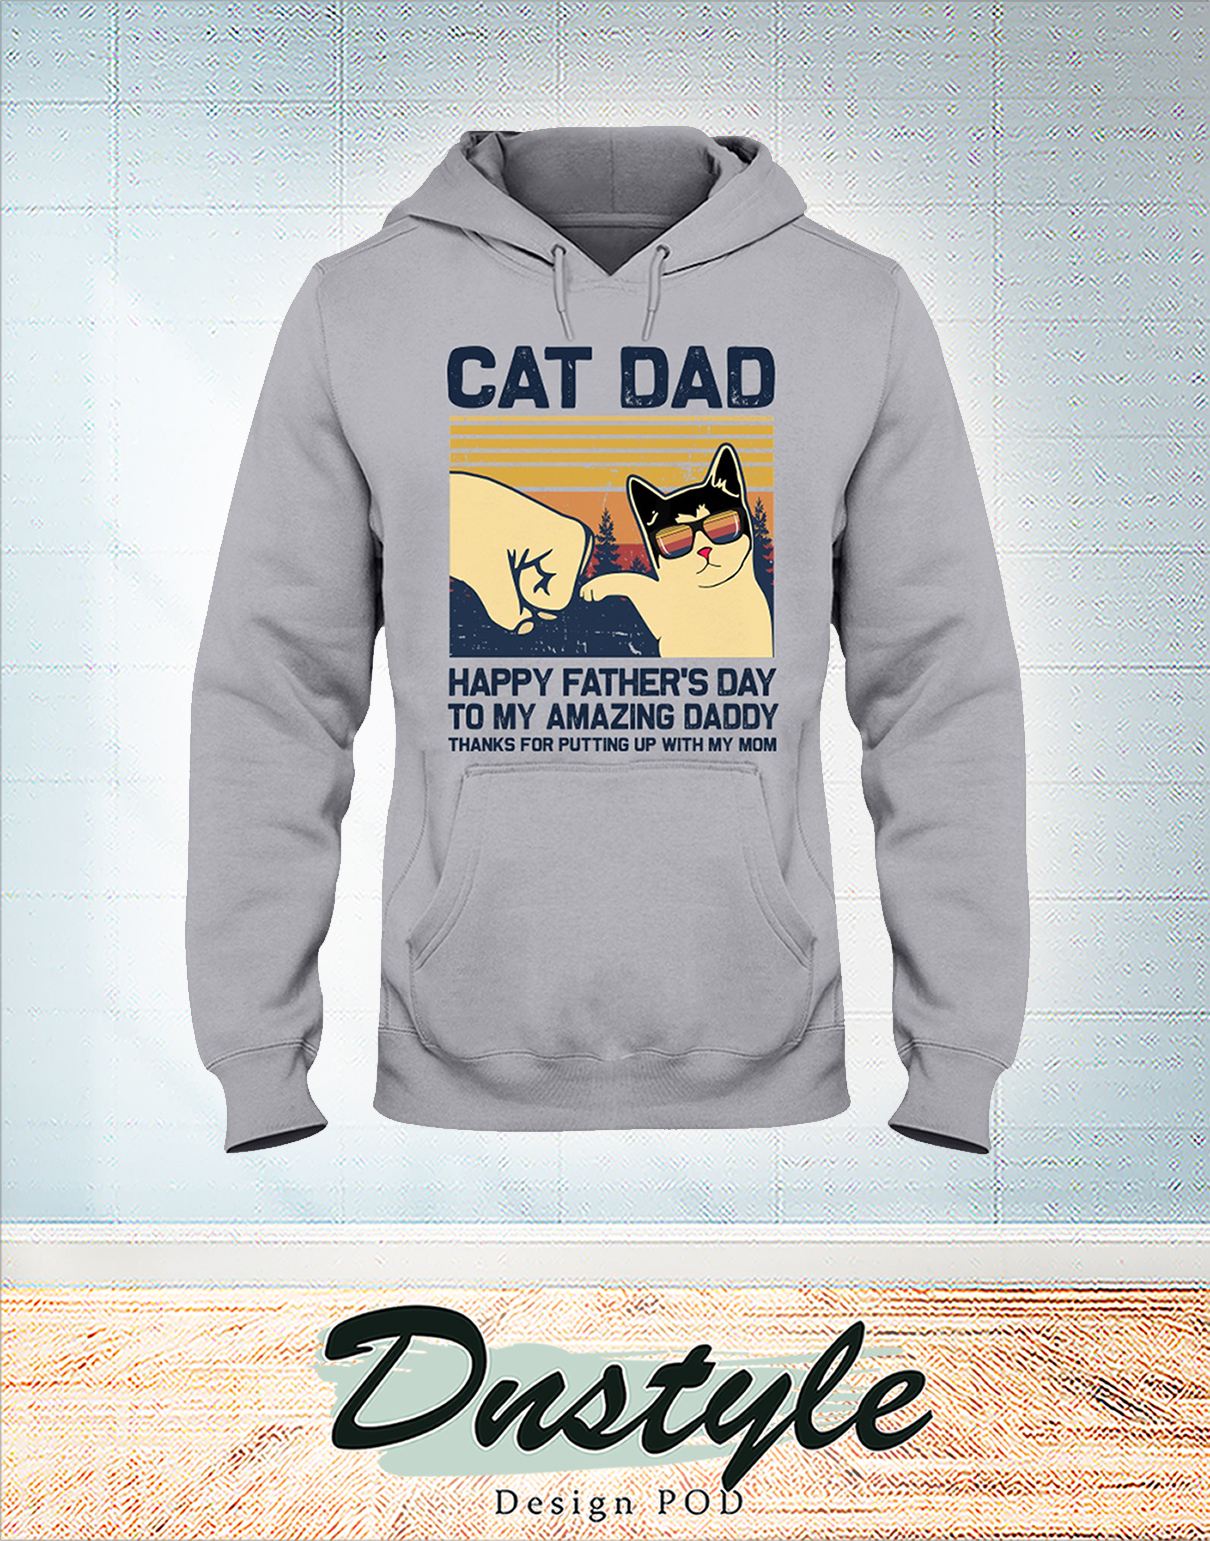 Vintage Cat dad happy father's day to amazing daddy shirt